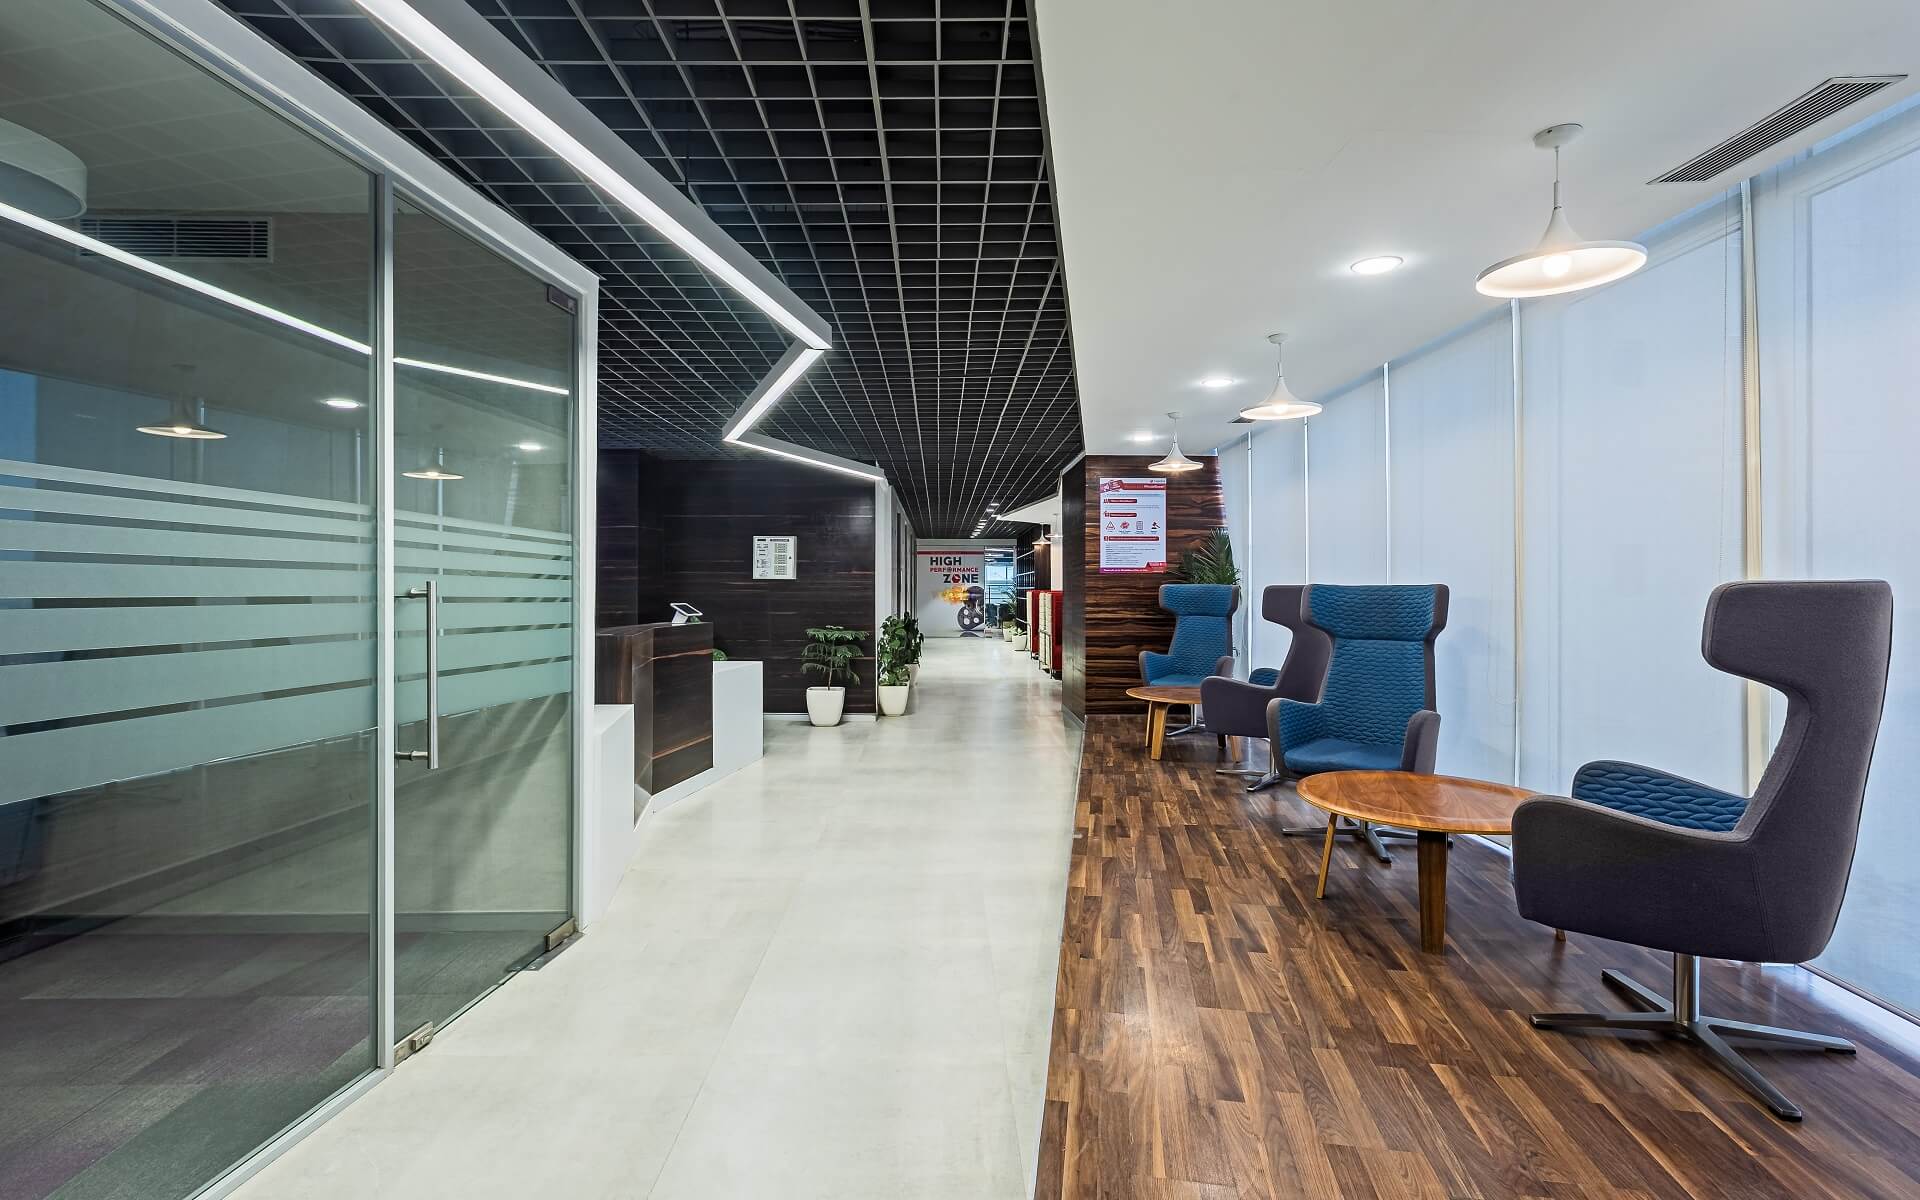 Snapdeal Office Design by Praxis group